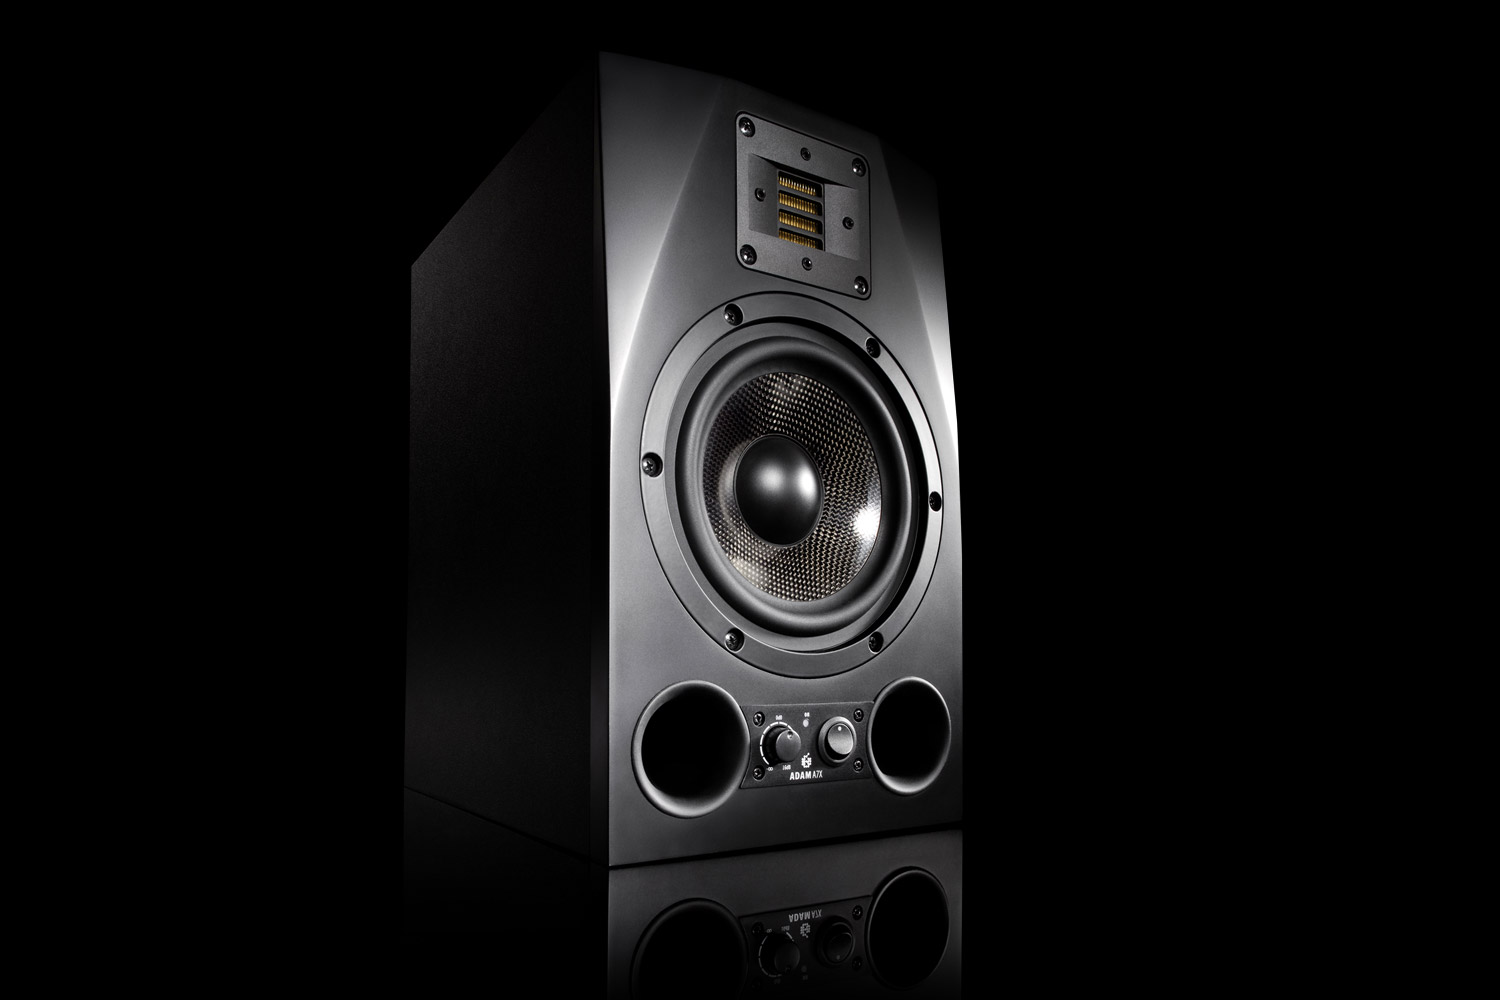 ADAM Audio - A7X Active Studio Monitor (Nearfield) (Archived Product)